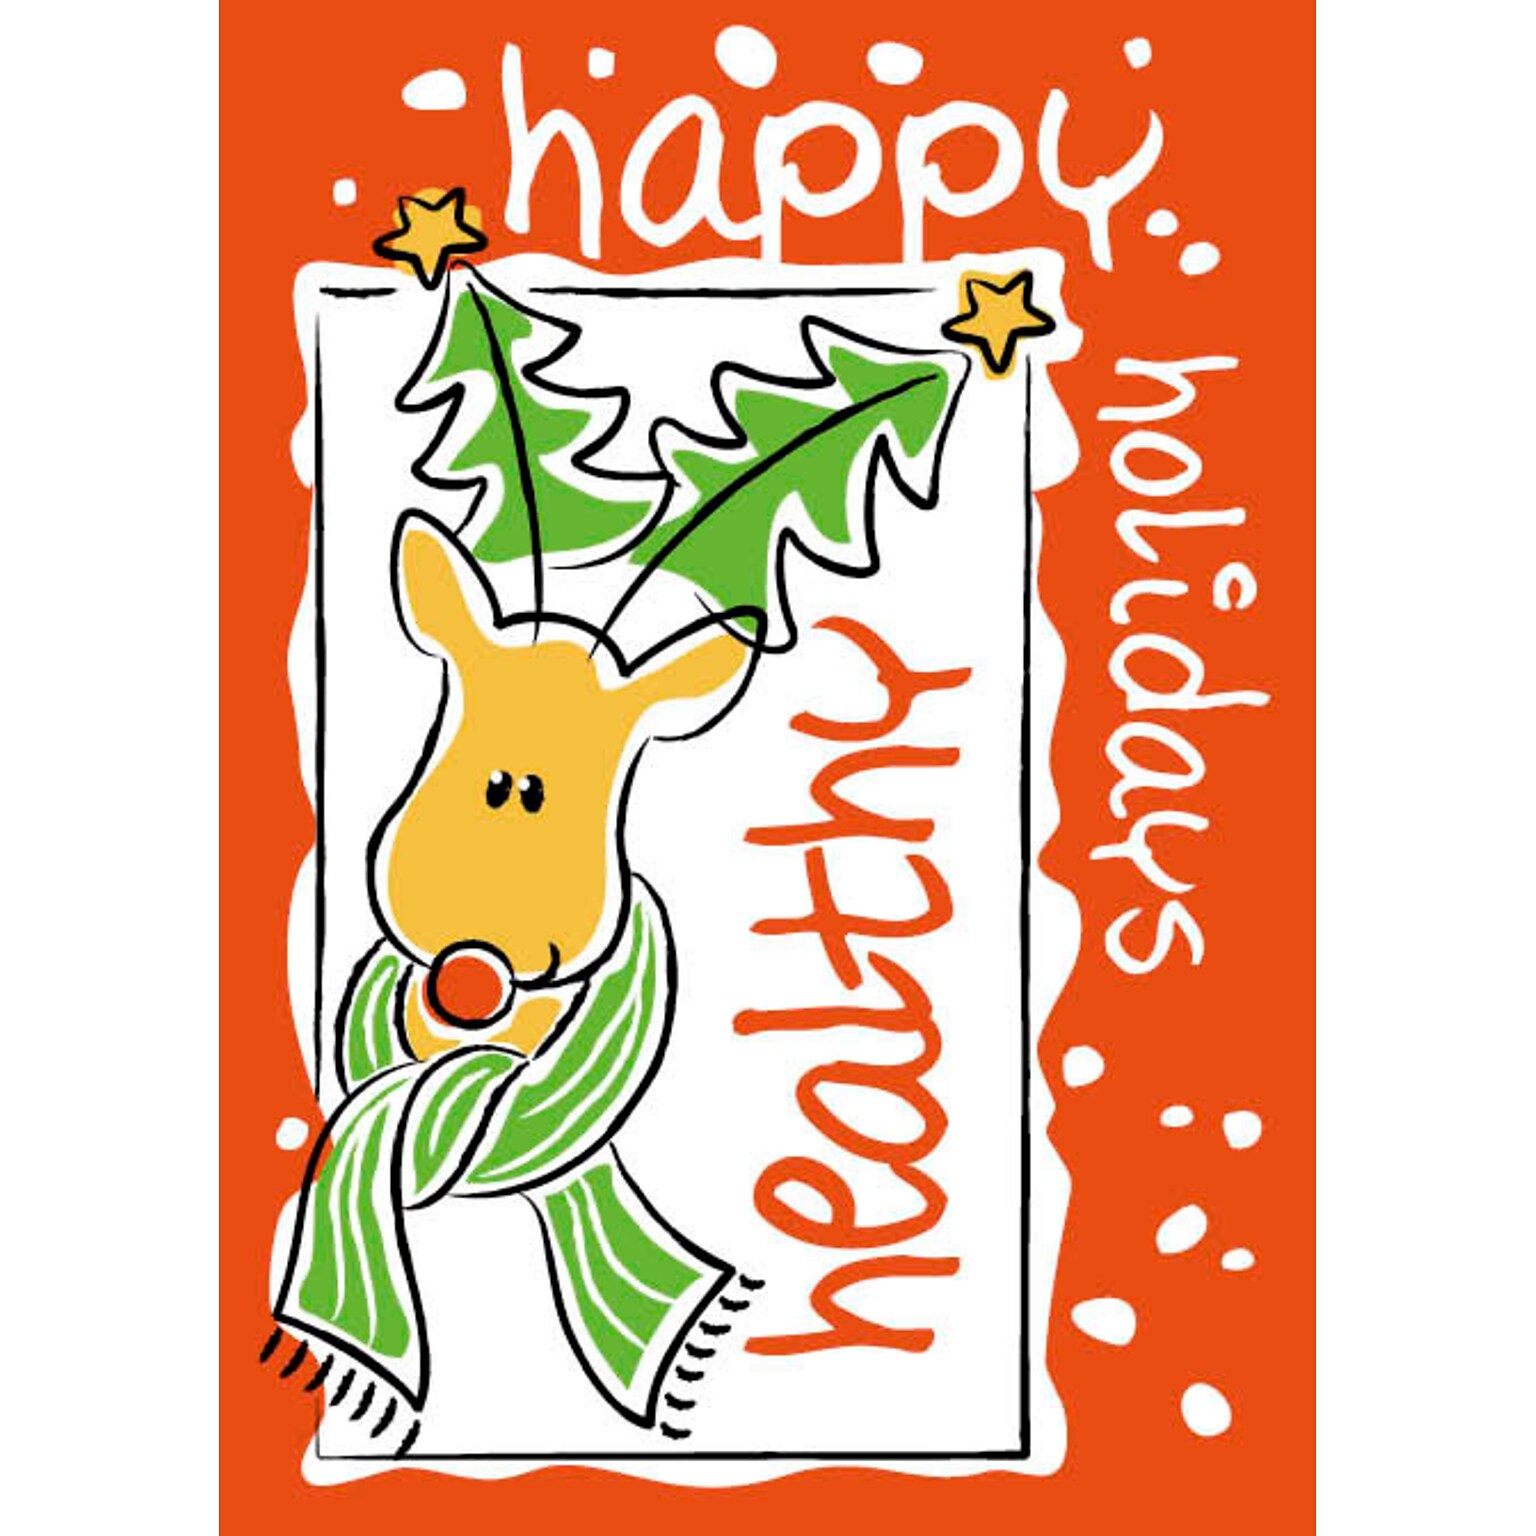 Happy Holidays Healthy Reindeer Holiday Greeting Cards, With A7 Envelopes, 7 x 5, 25 Cards per Set